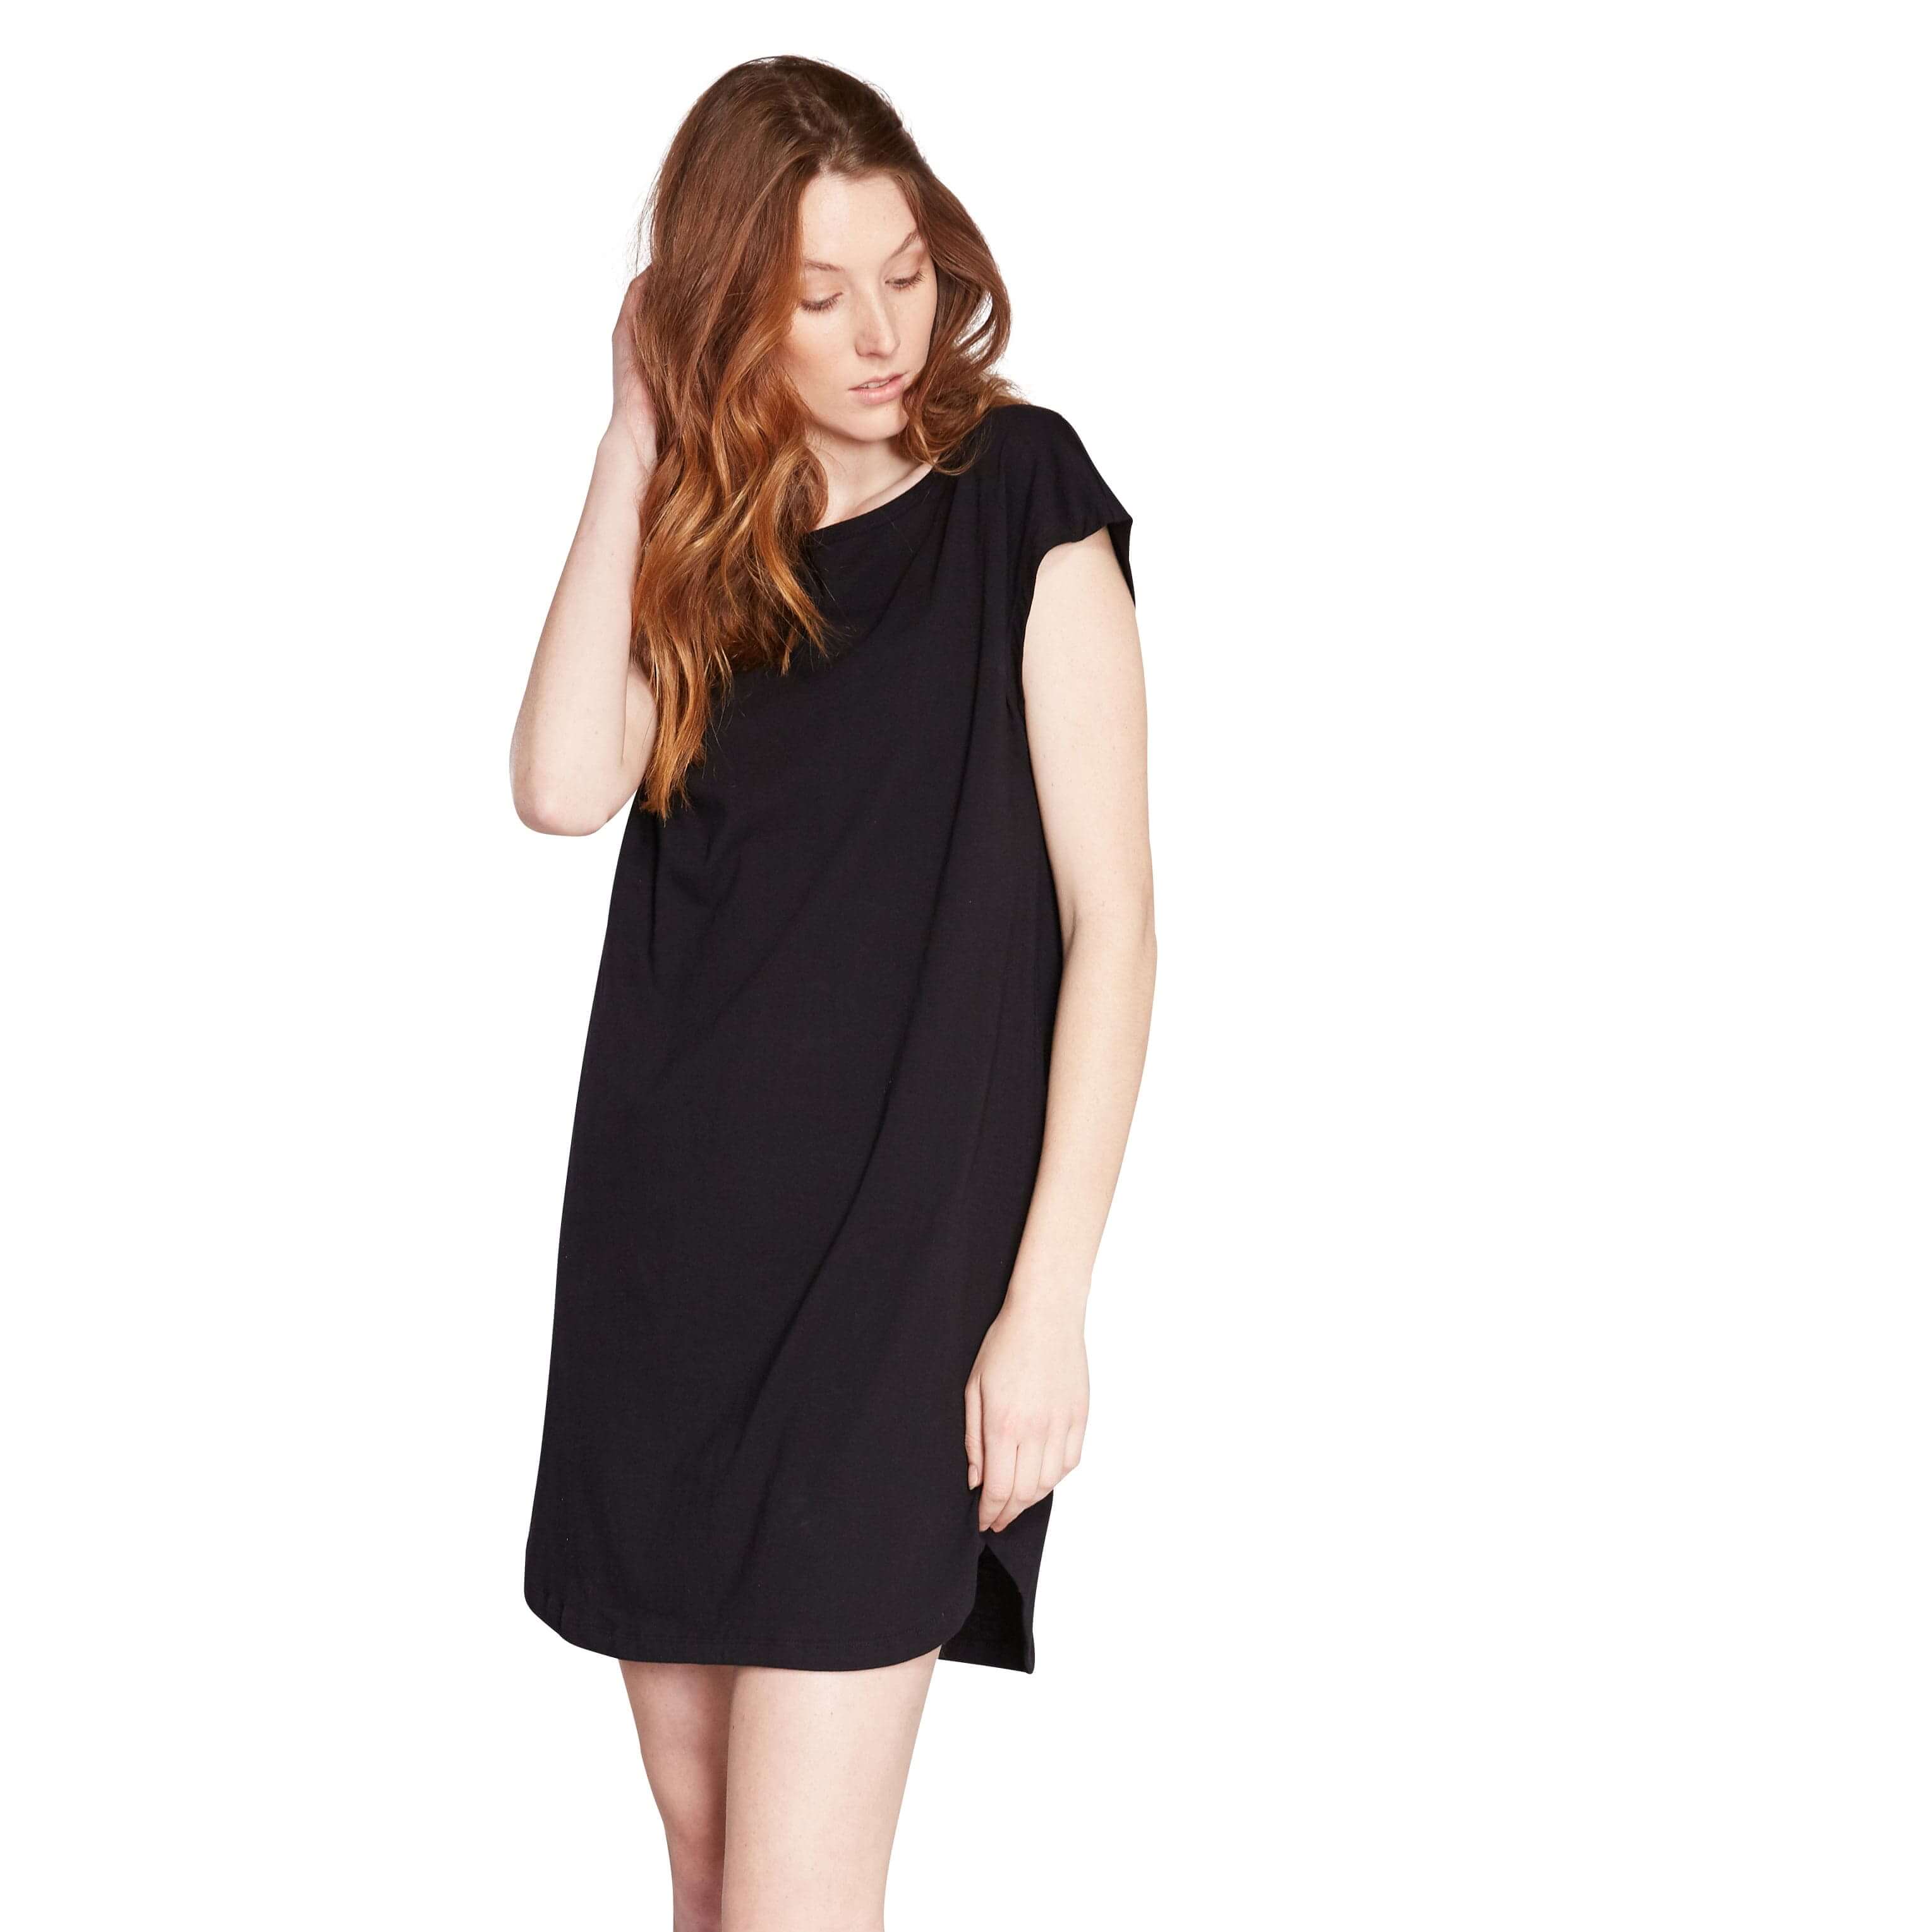 Woman wearing black coloured cotton nightie/long tee dress made in Australia from 100% organic cotton